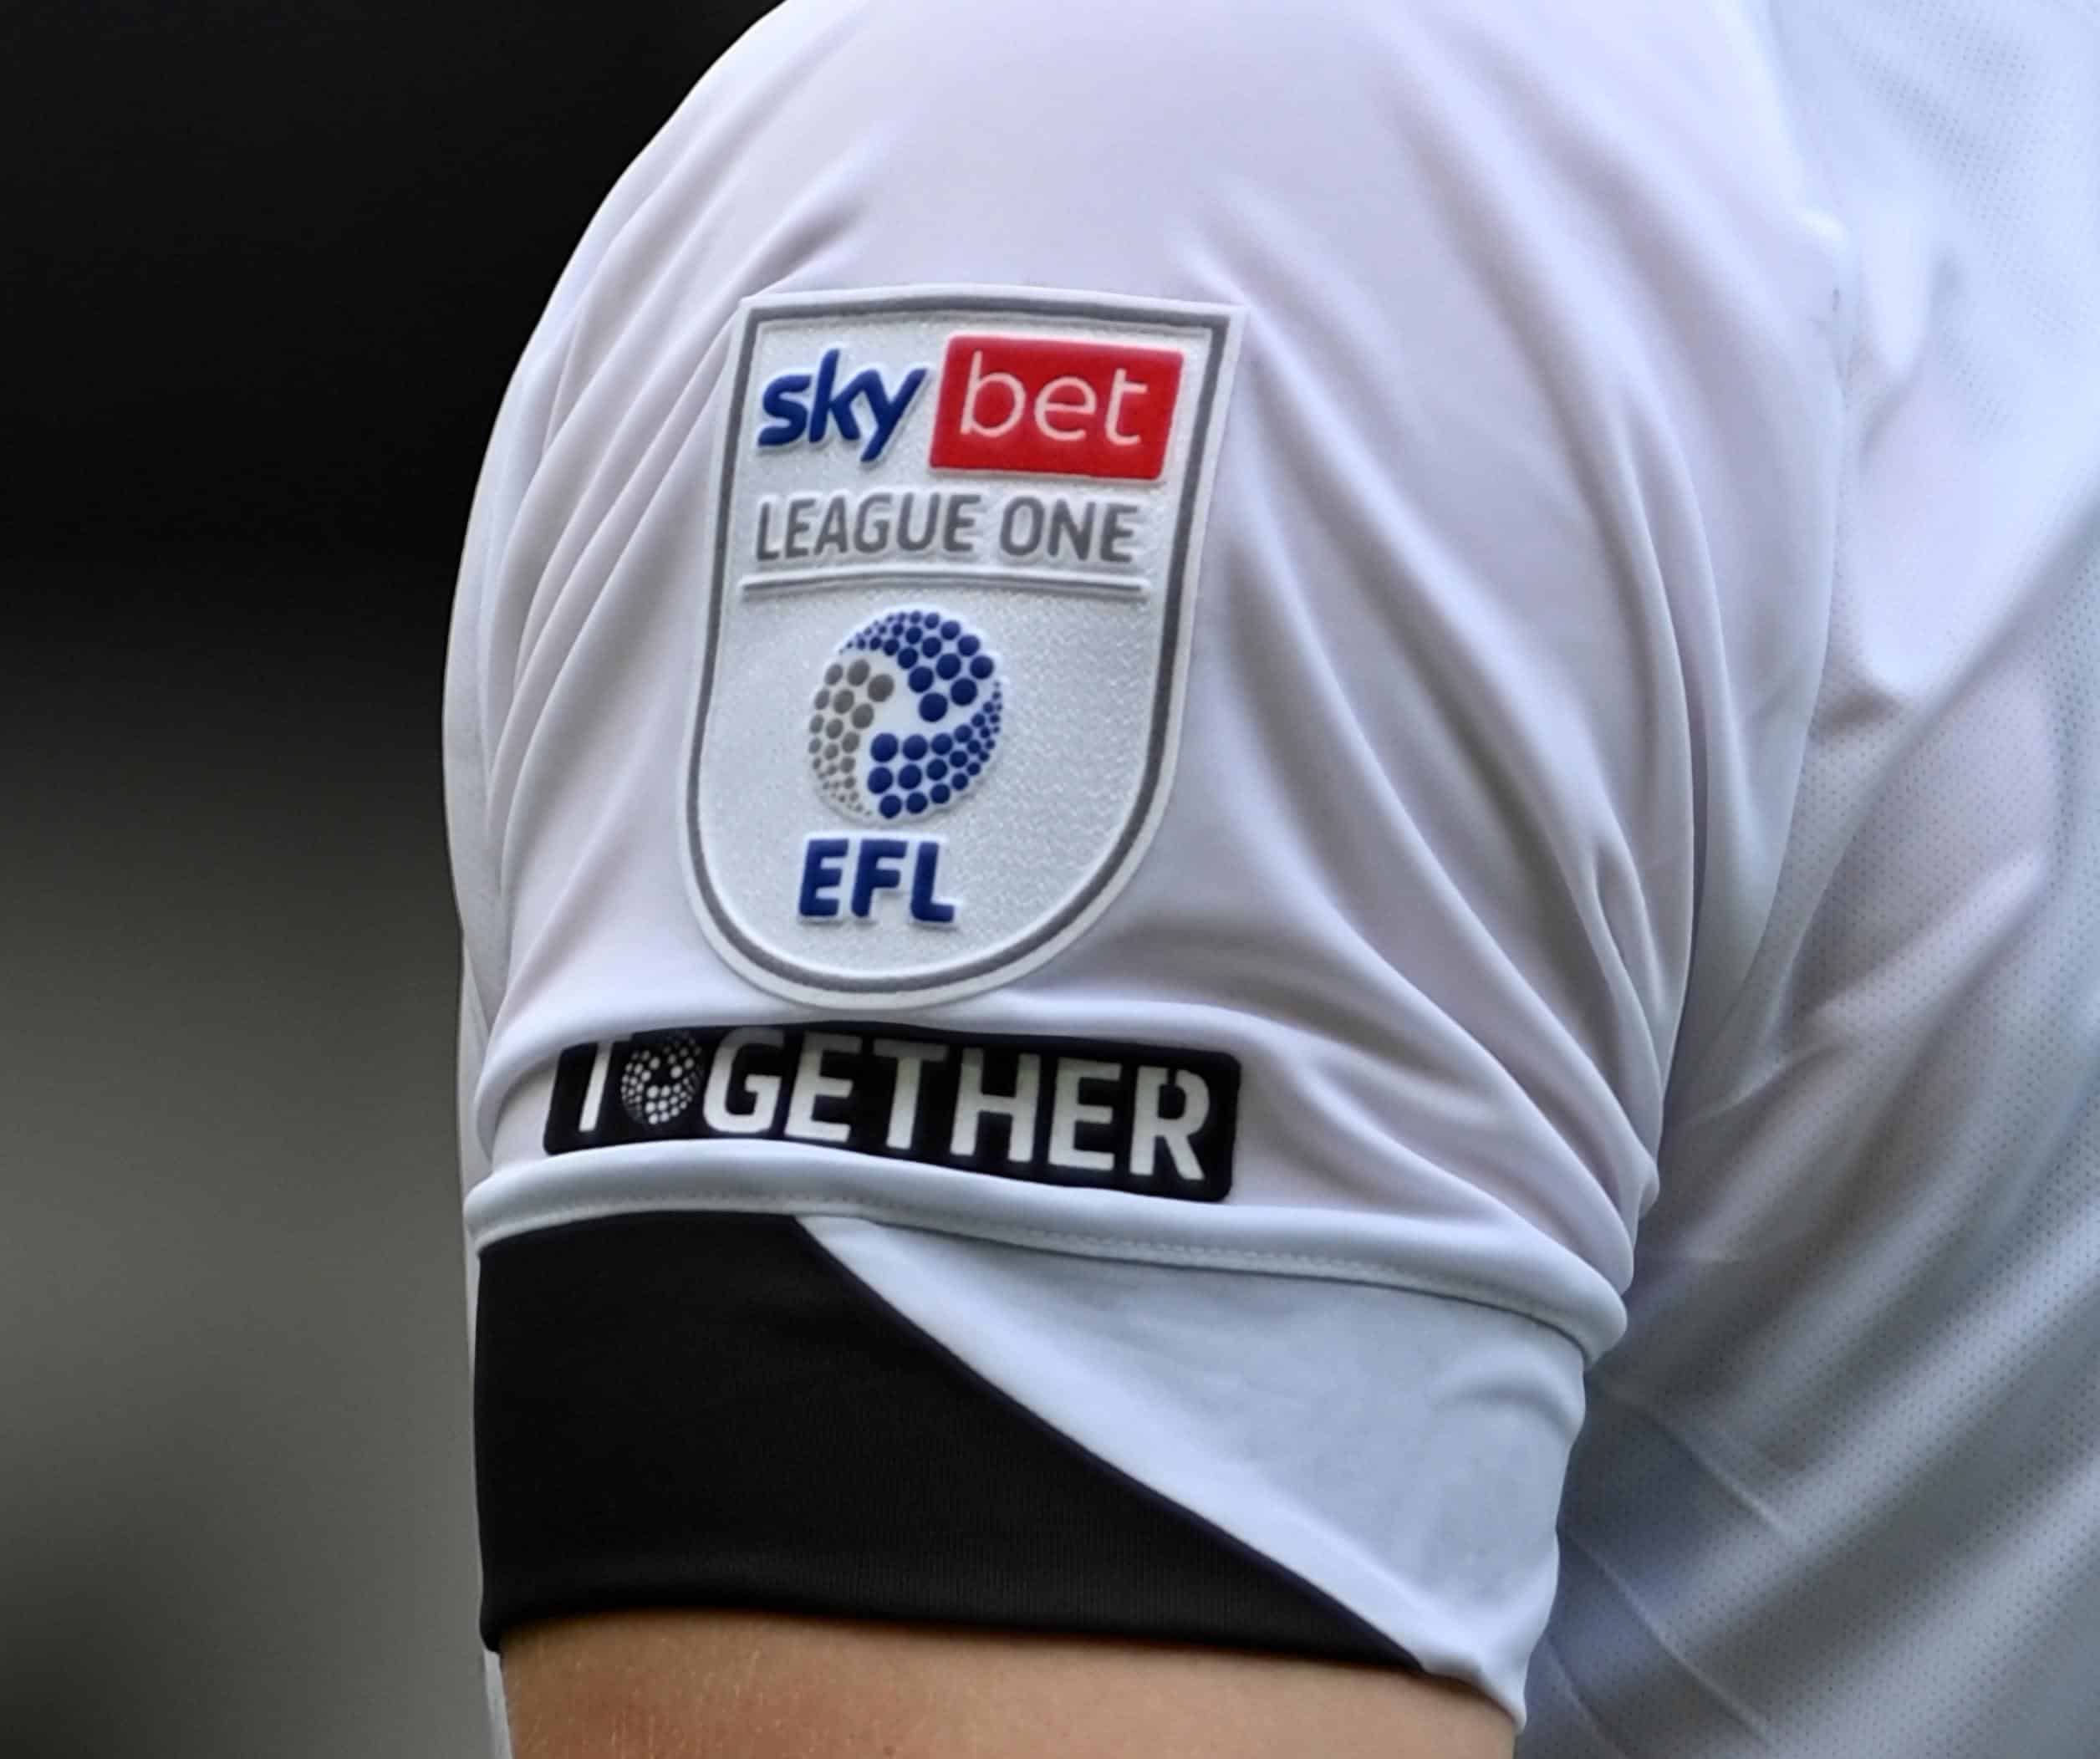 Efl in it together armband